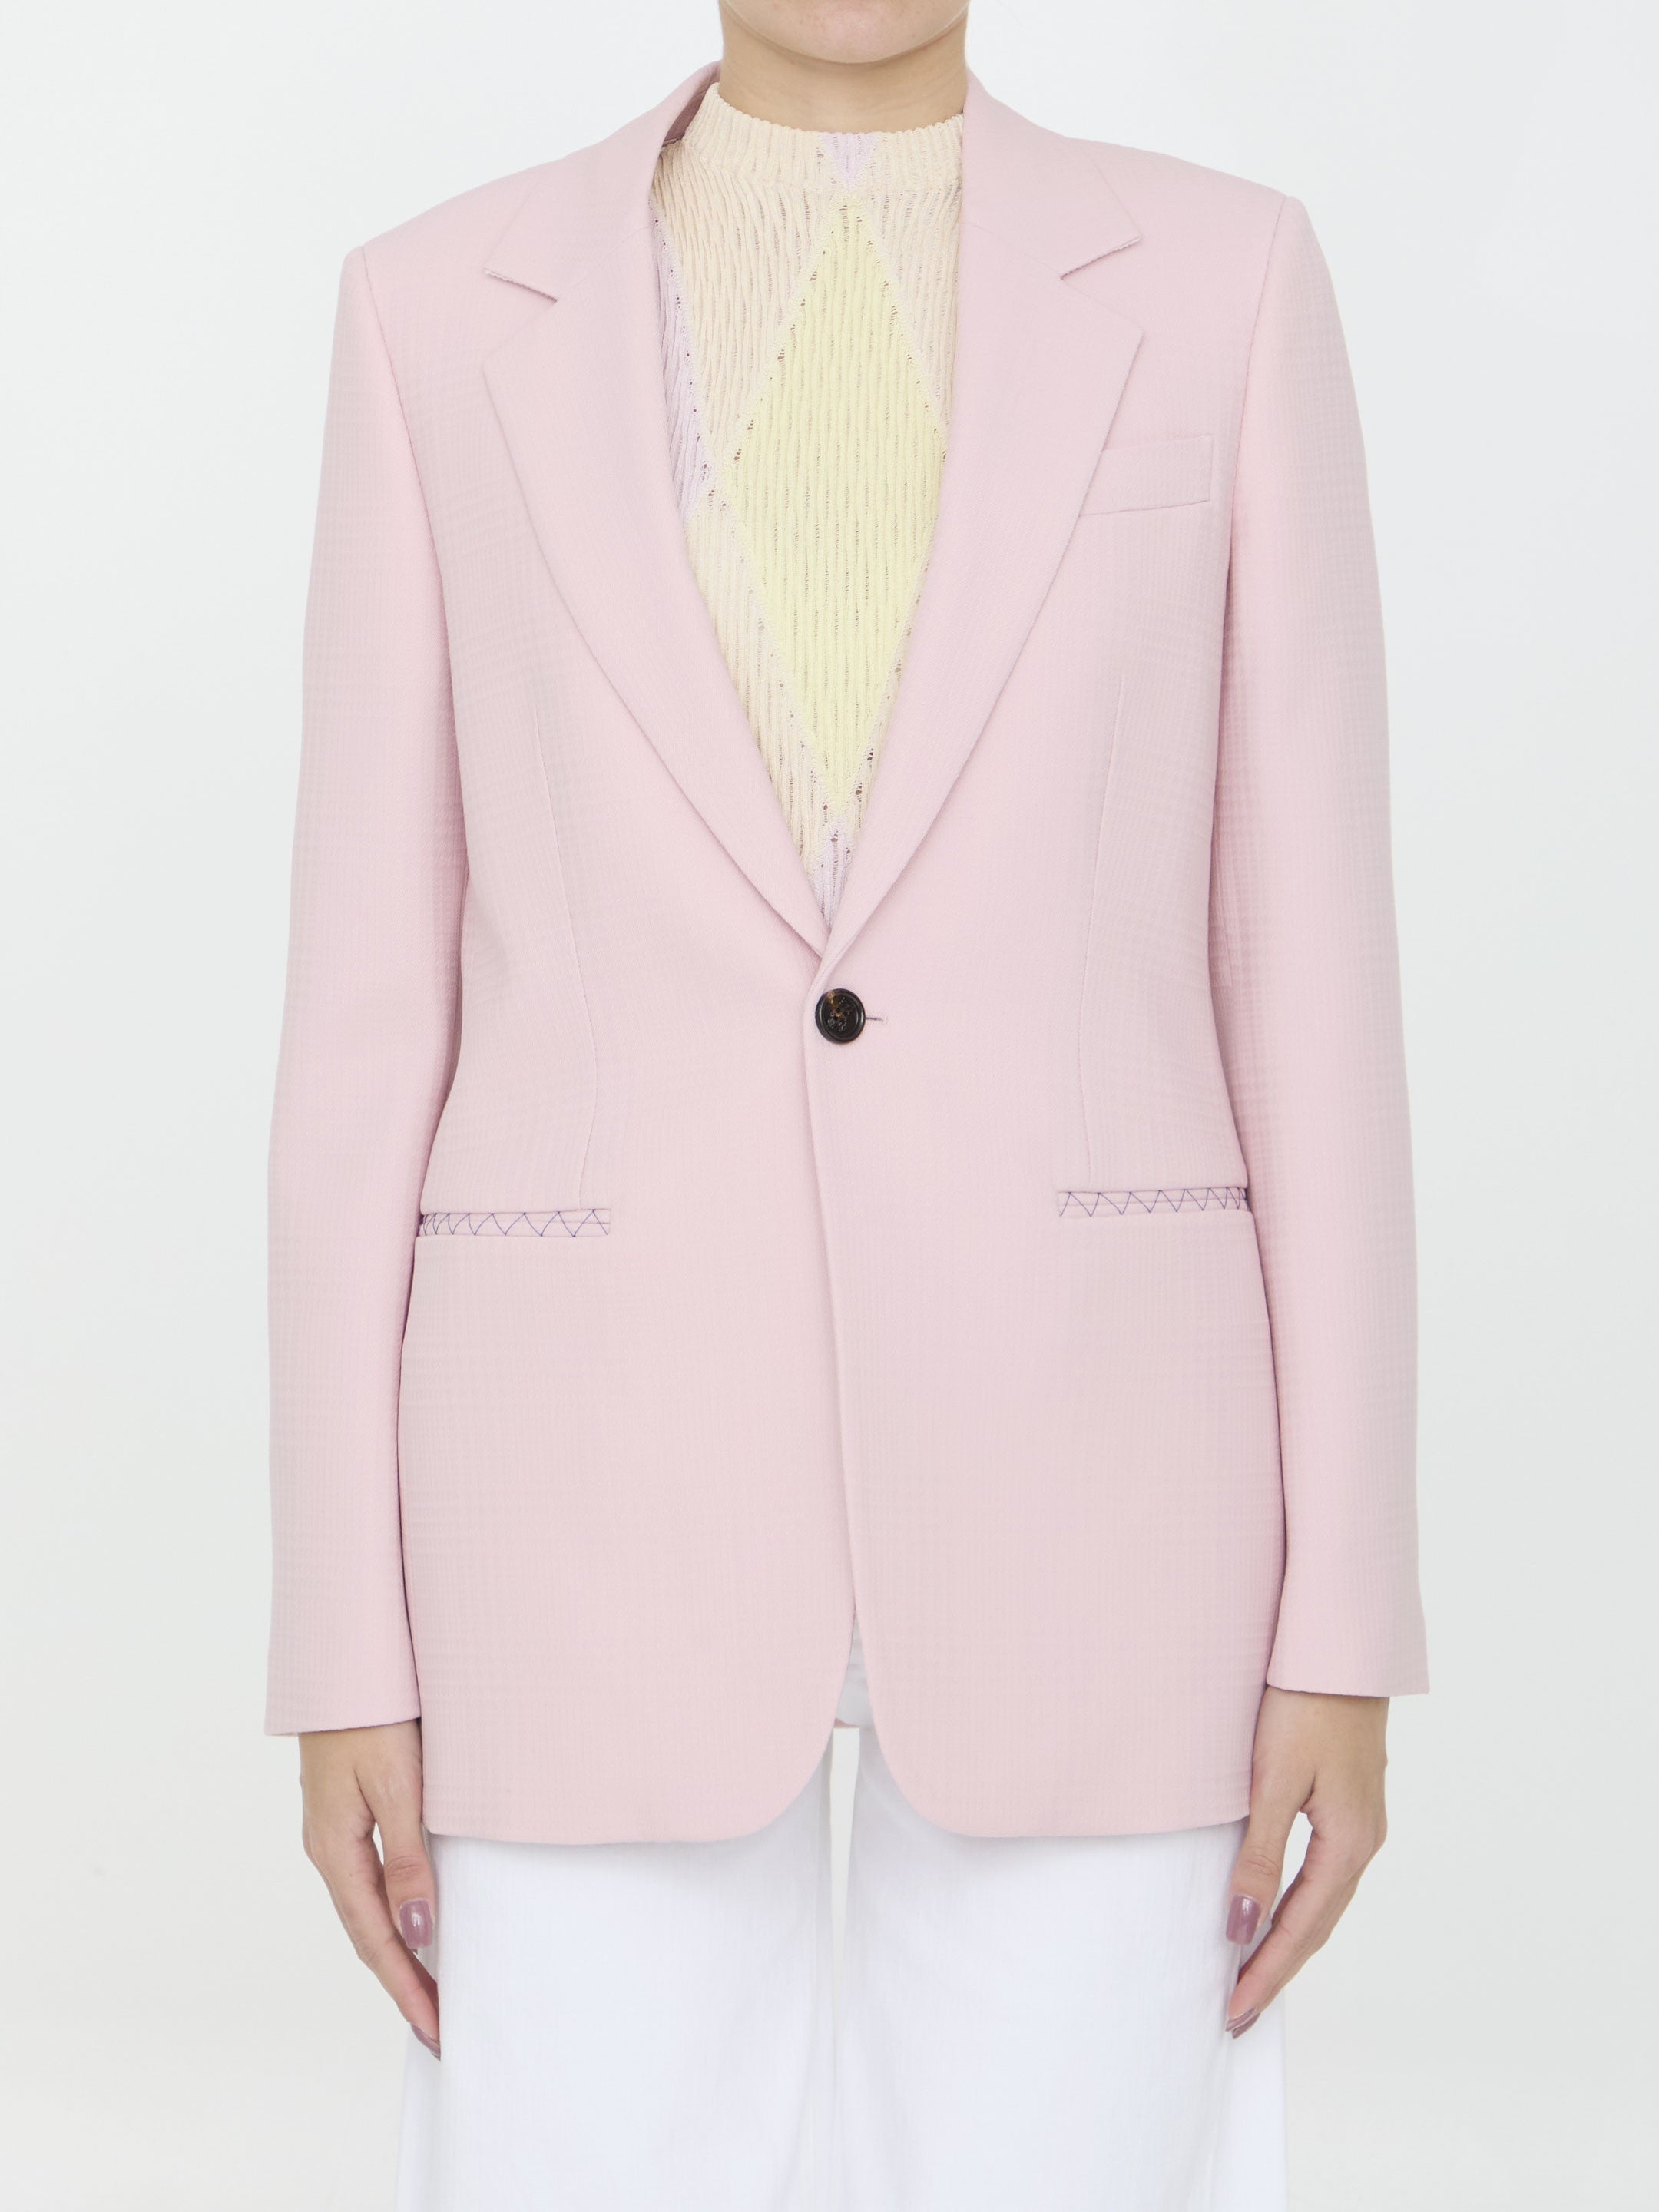 BURBERRY-OUTLET-SALE-Tailored-jacket-in-wool-Jacken-Mantel-4-PINK-ARCHIVE-COLLECTION.jpg